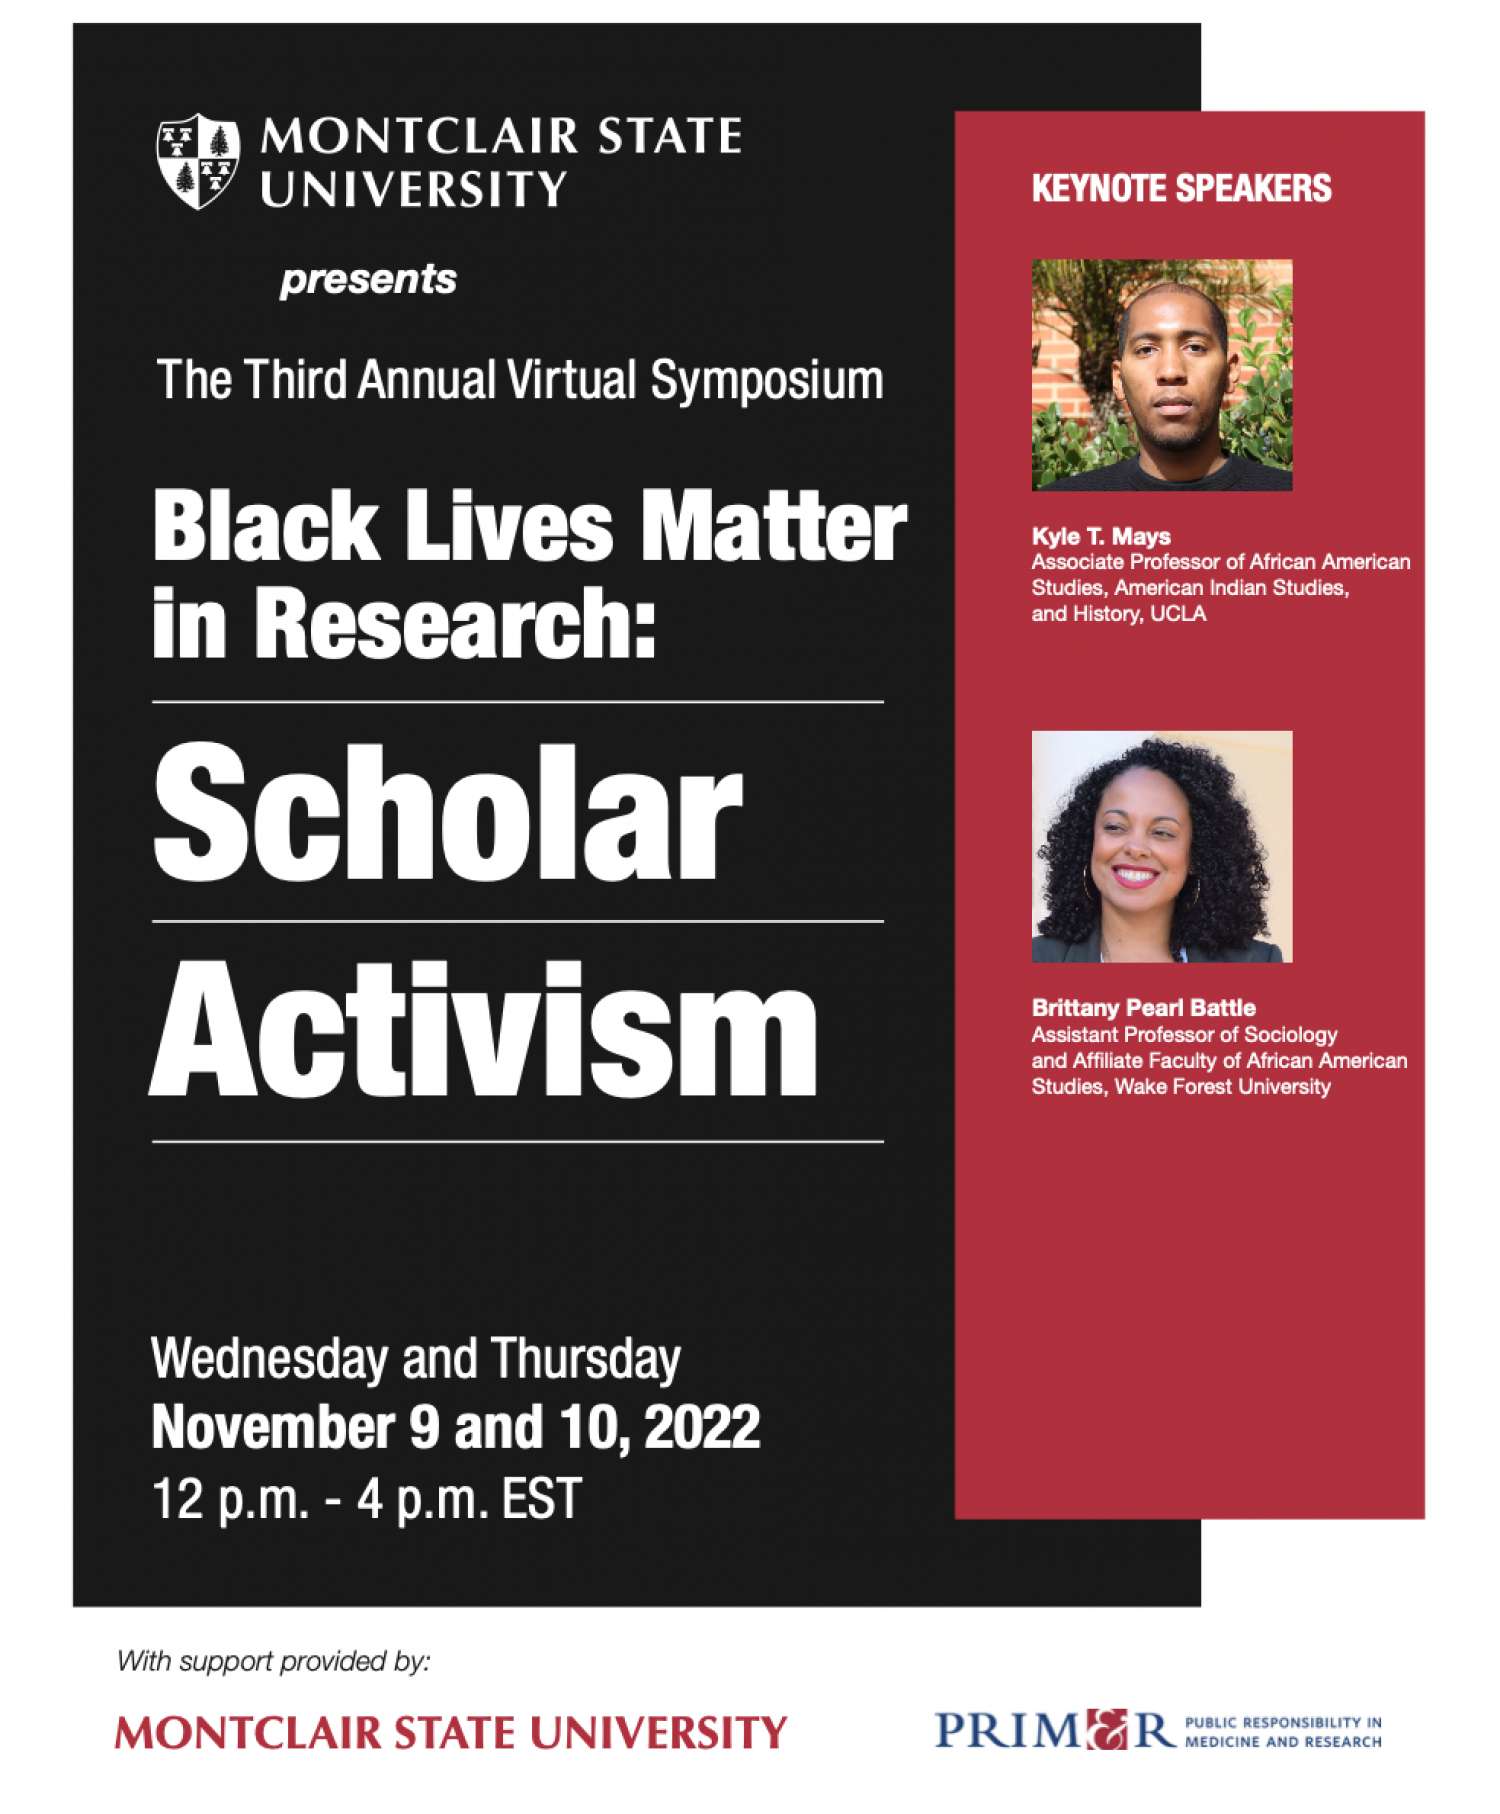 Black Lives Matter in Research